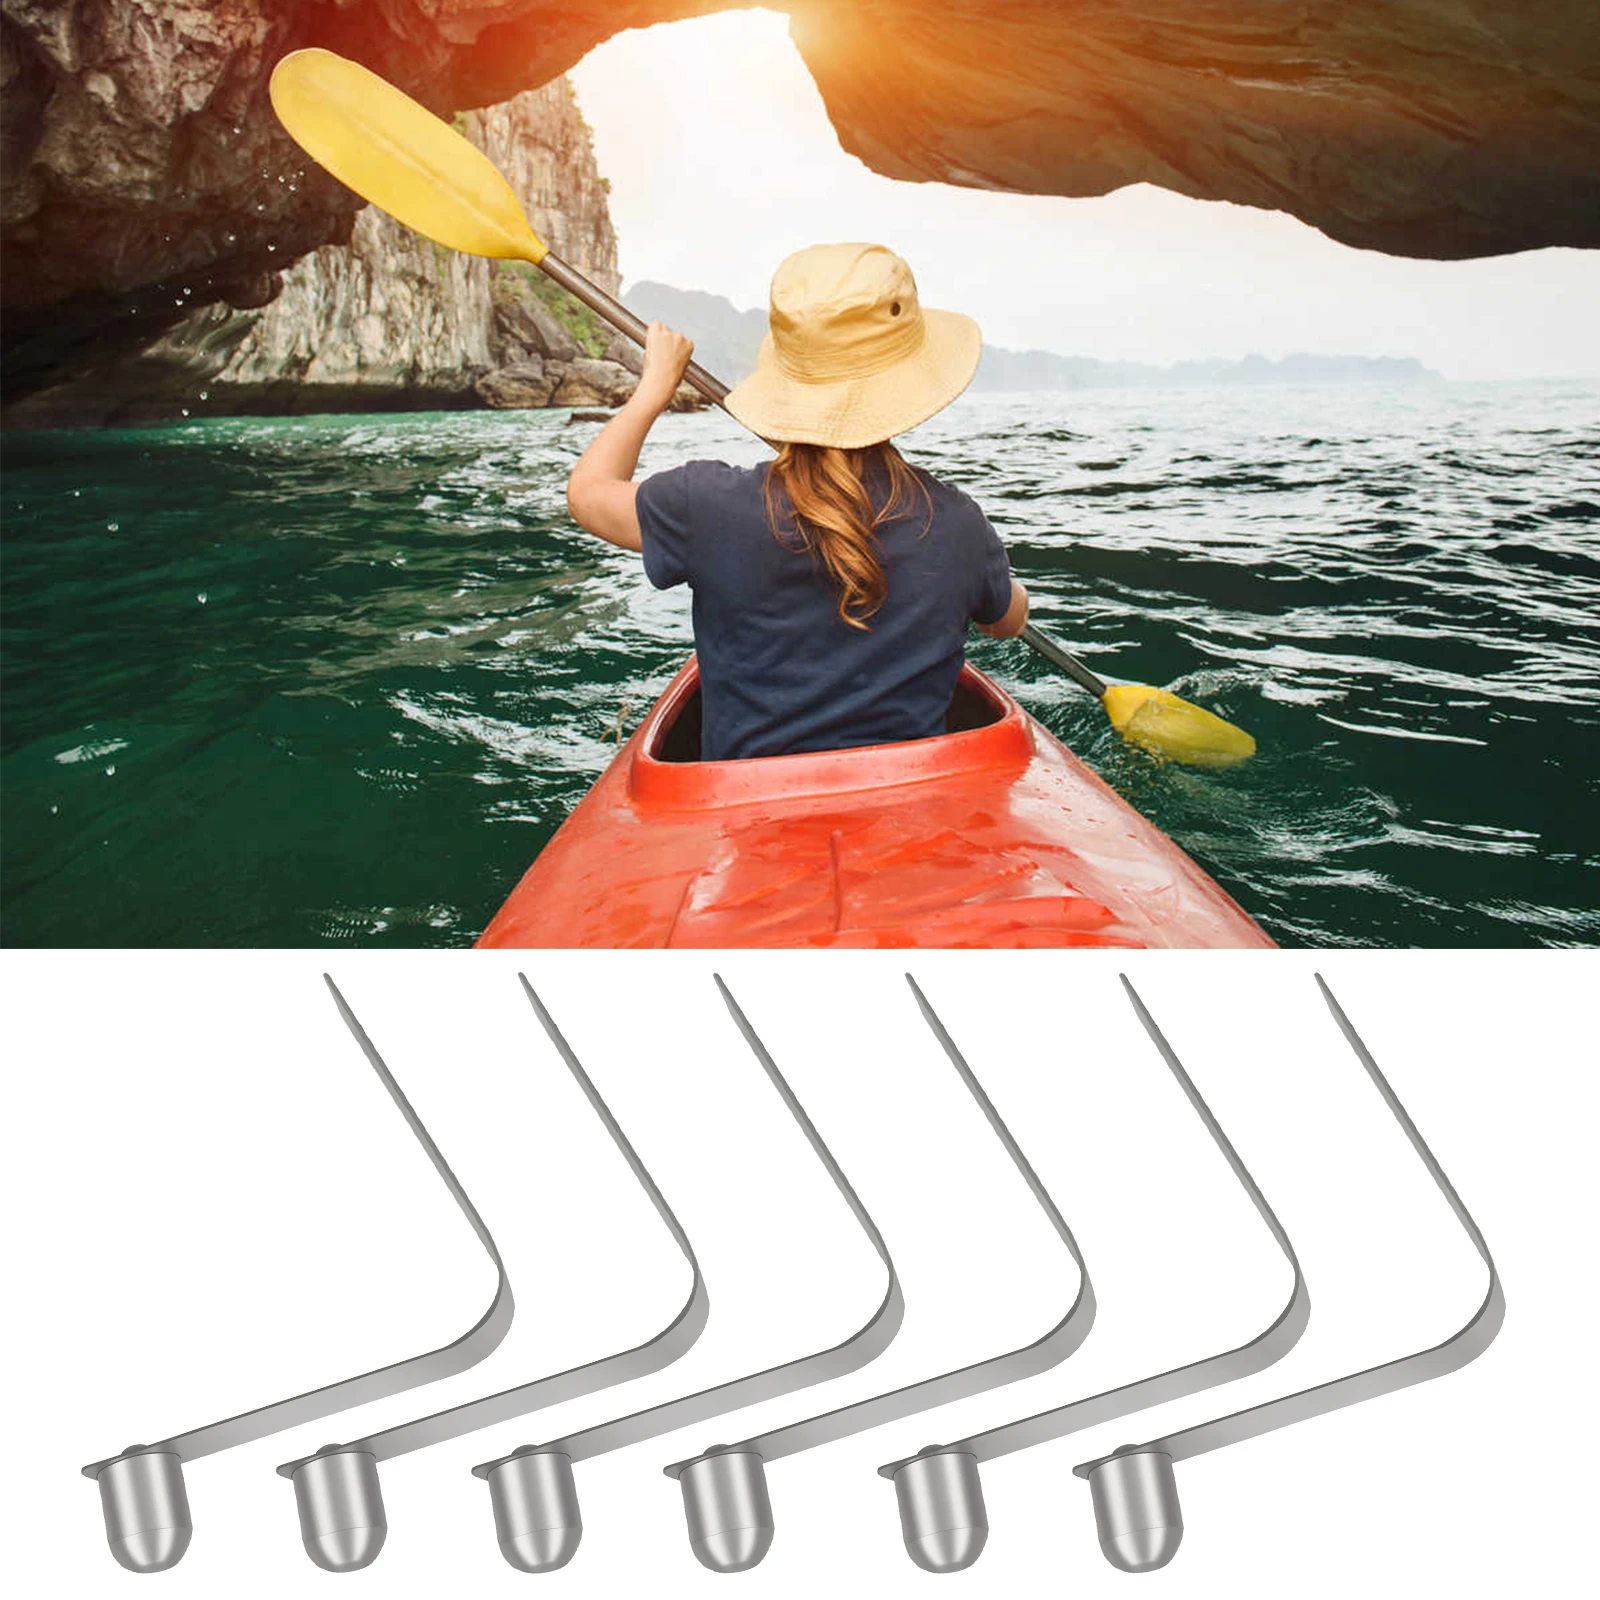 6x Stainless Steel Kayak Paddle Push Button Spring Snap Clips Tent Pole Clip